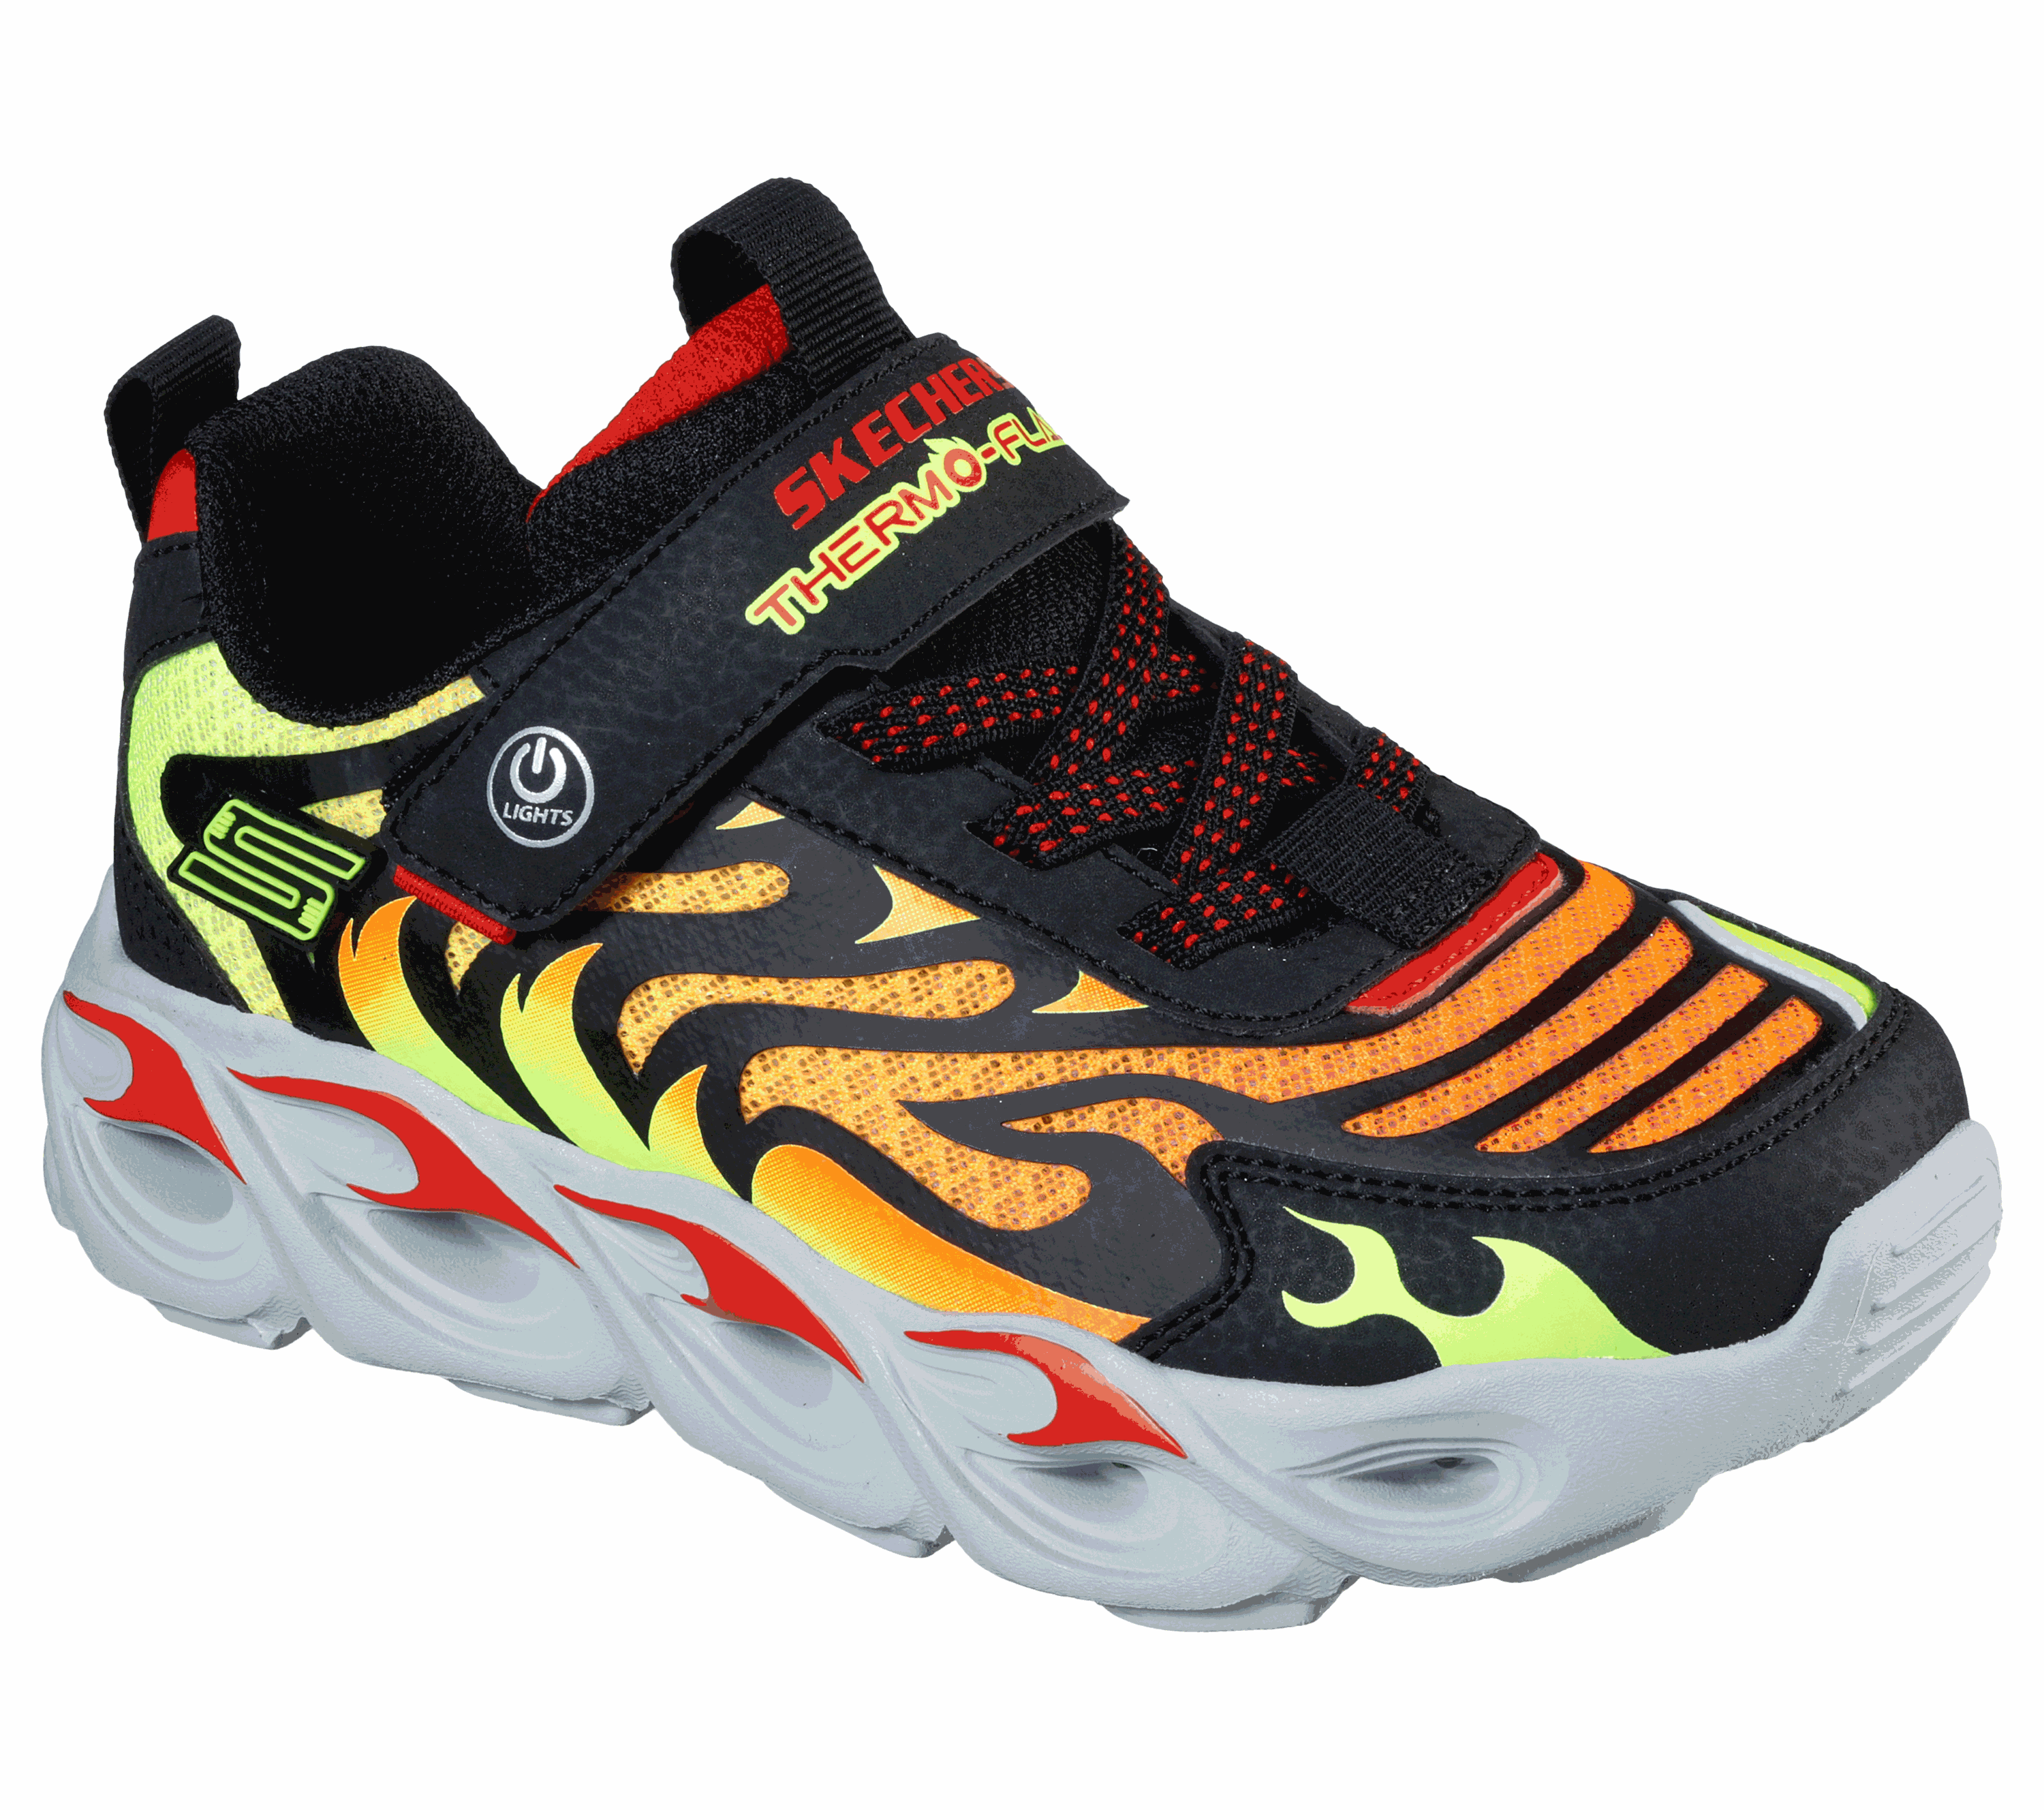 Boys' Skechers S Lights Thermo Flash Shoes